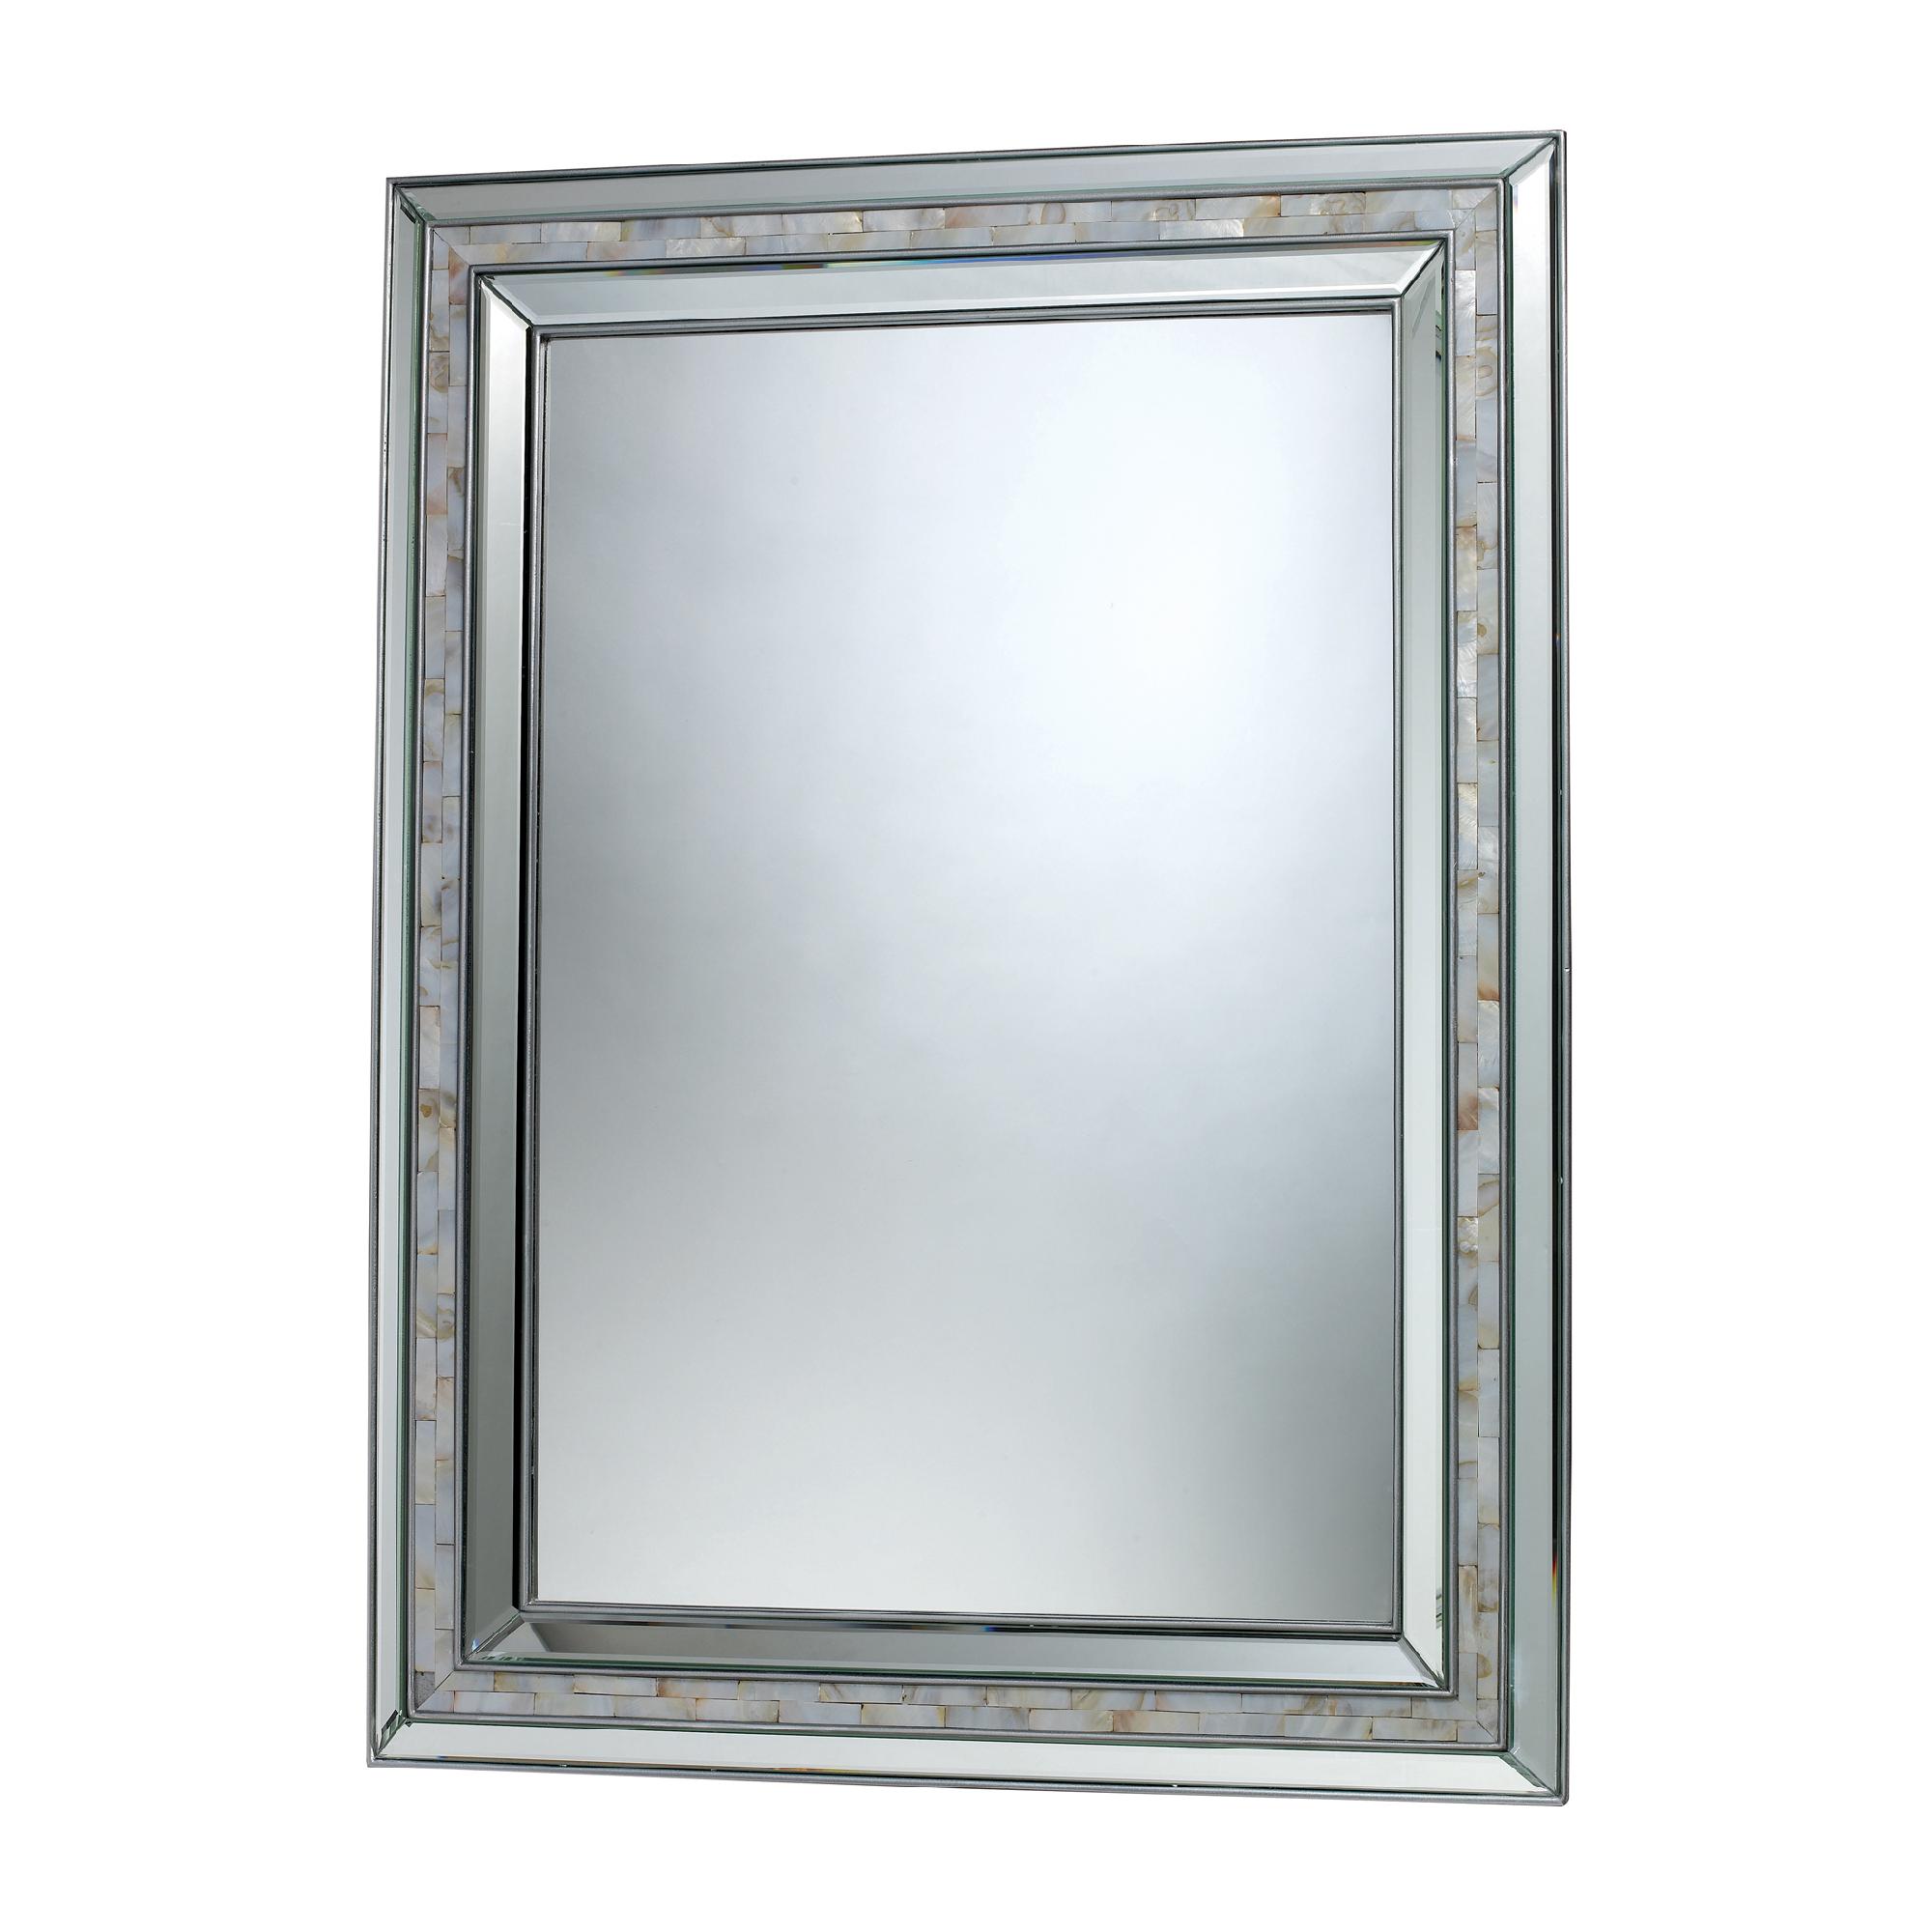 Sterling Industries Sardis Mirror In Brushed Steel And Mother Of Pearl Shell